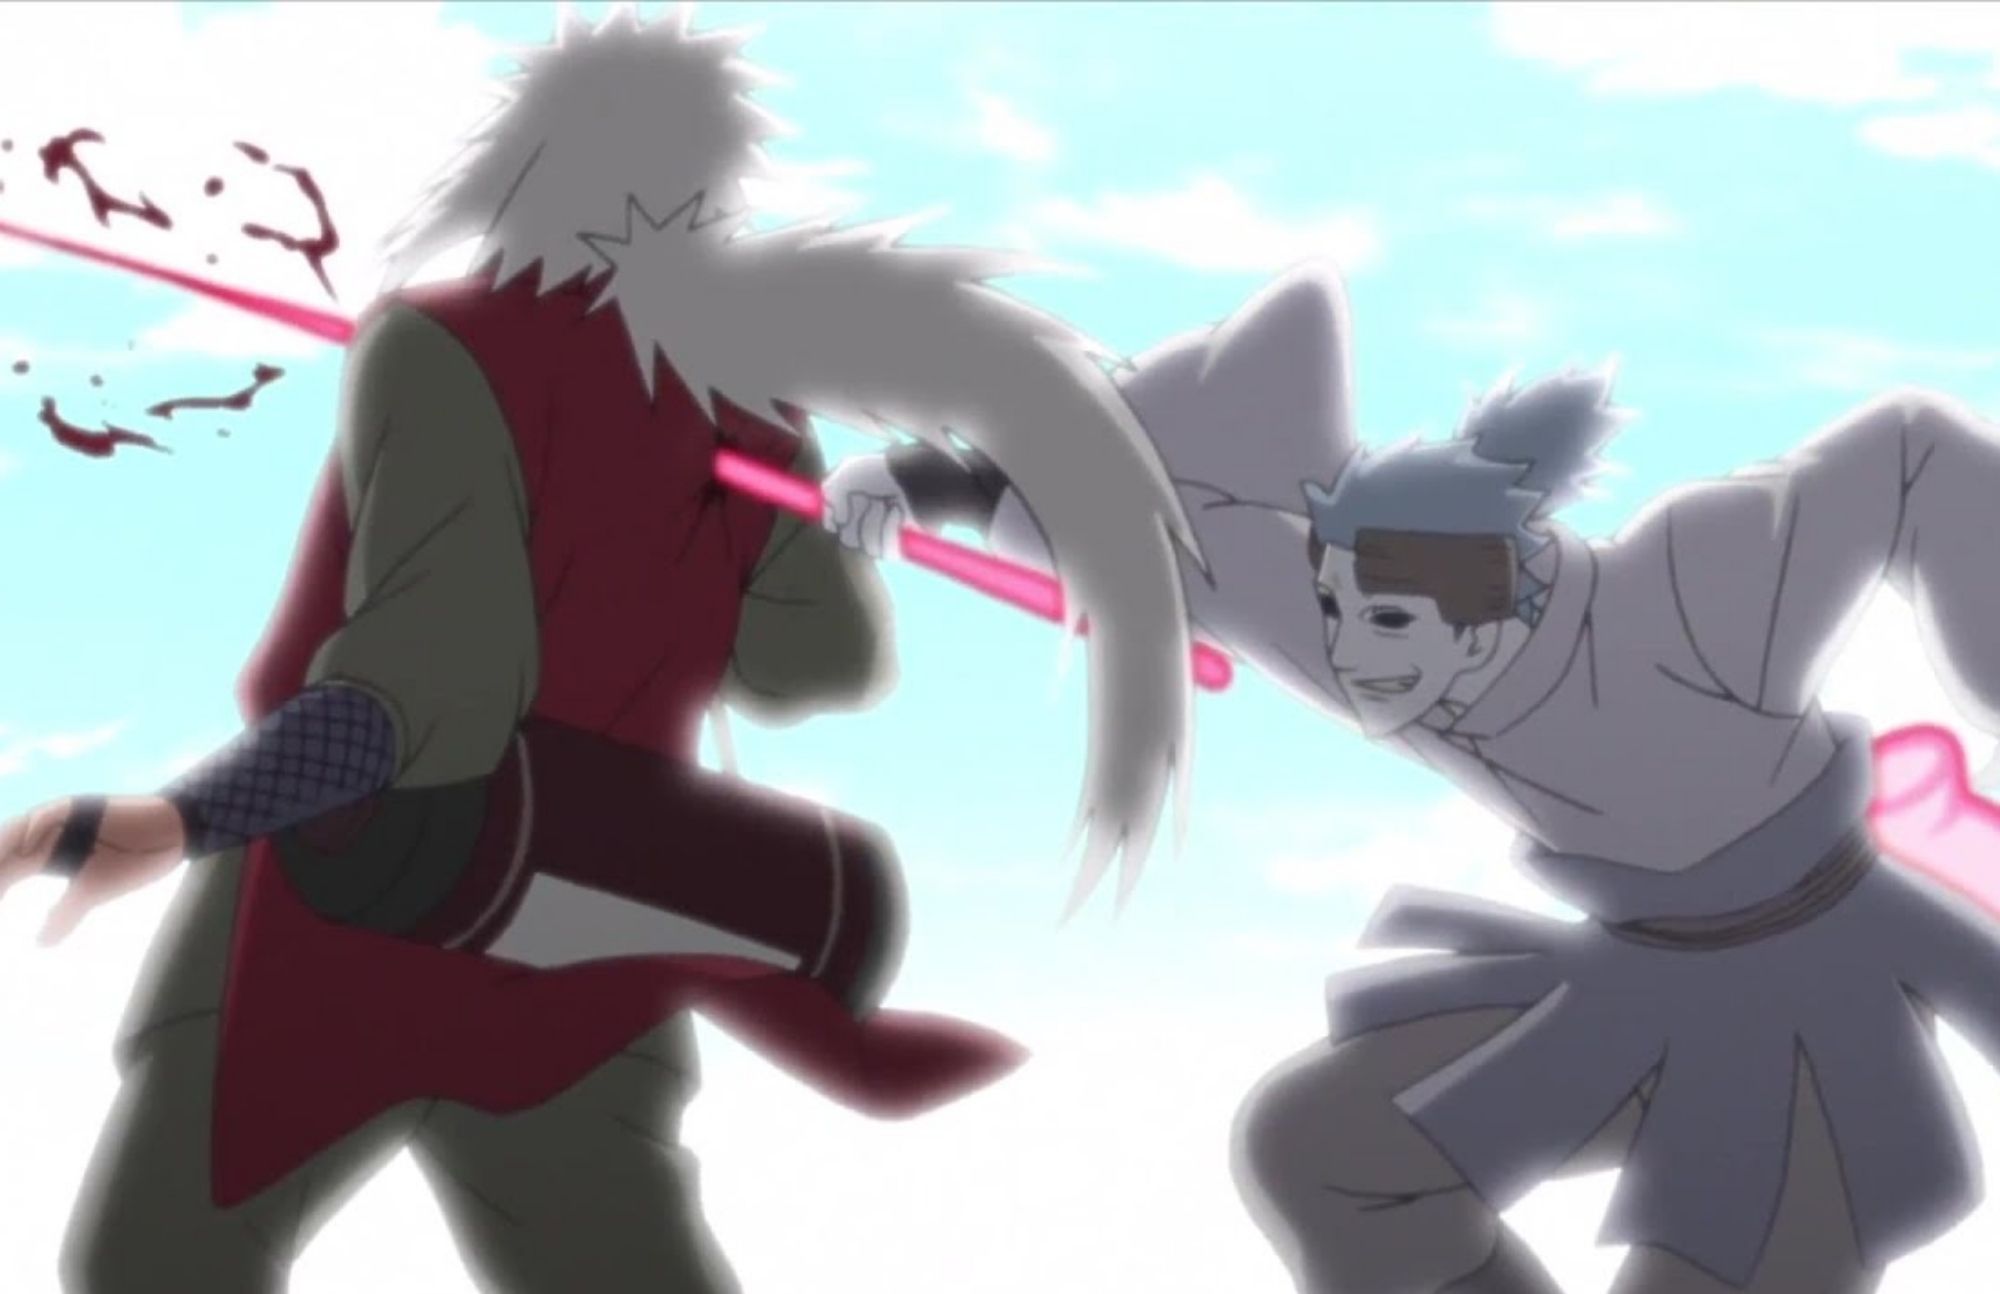 Urikashi, a pale white color kills Jiraiya using a pink long rod and some blood splash out in the air